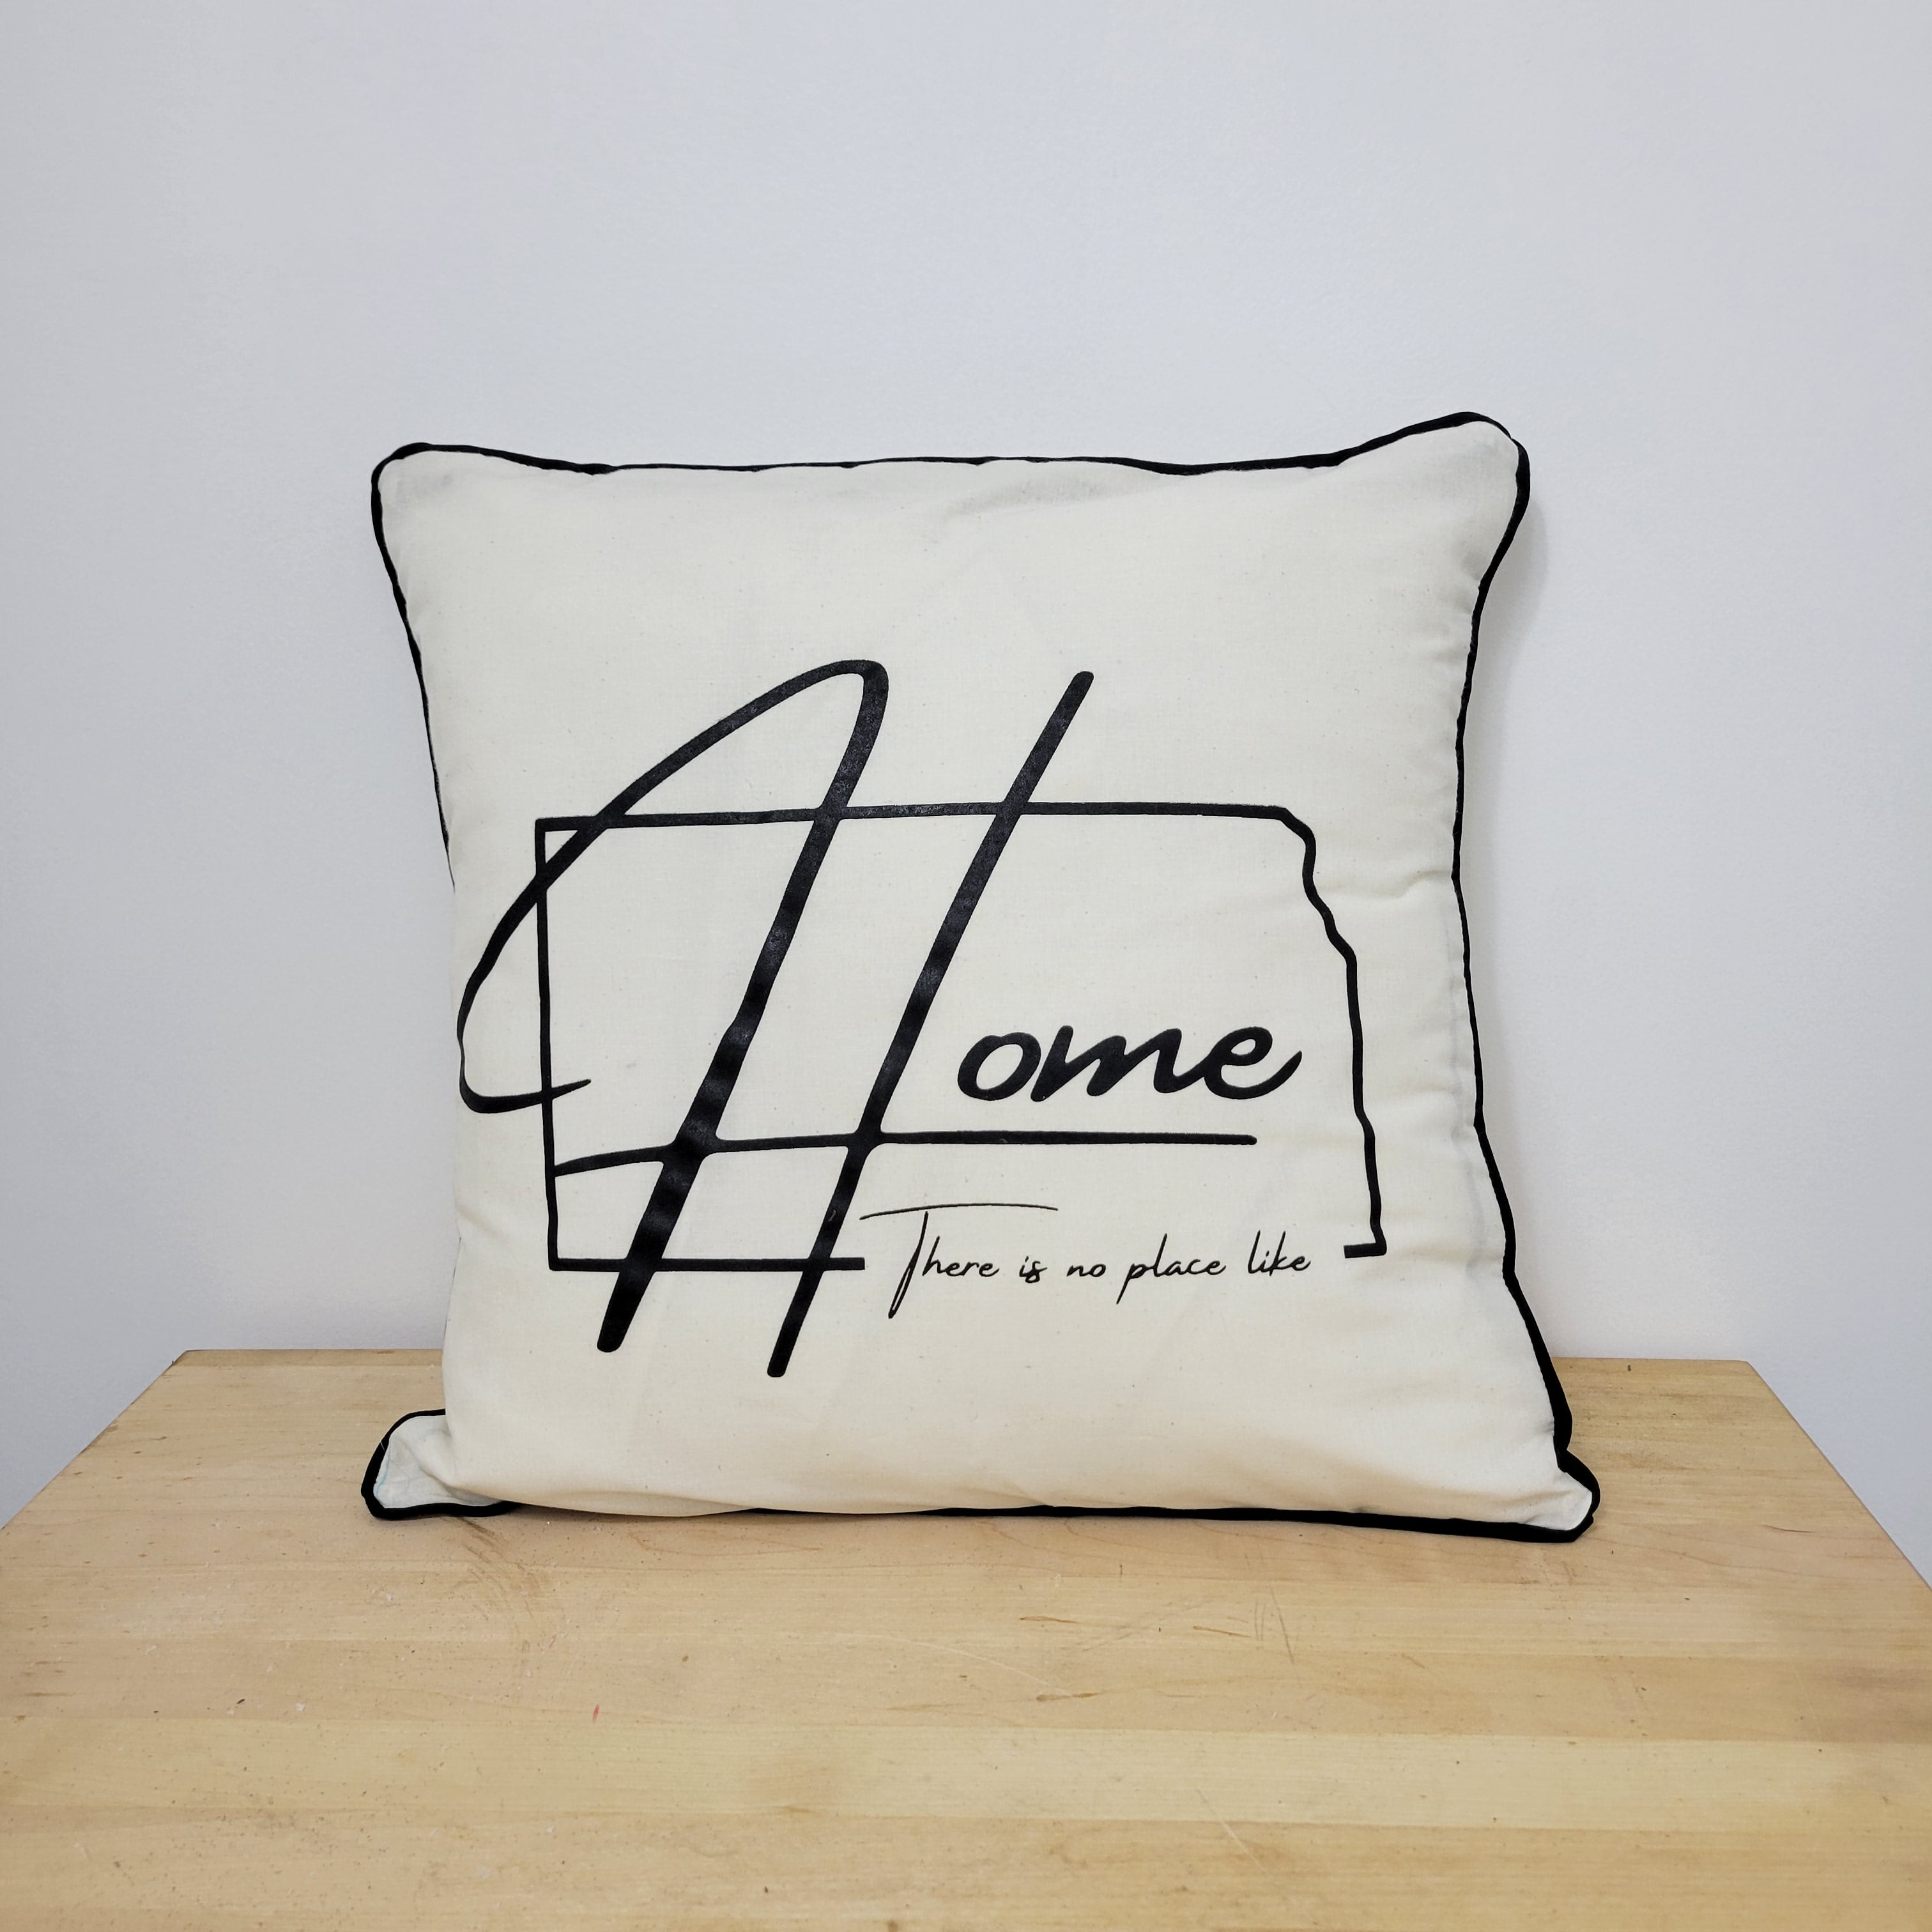 No Place Like Home Pillow